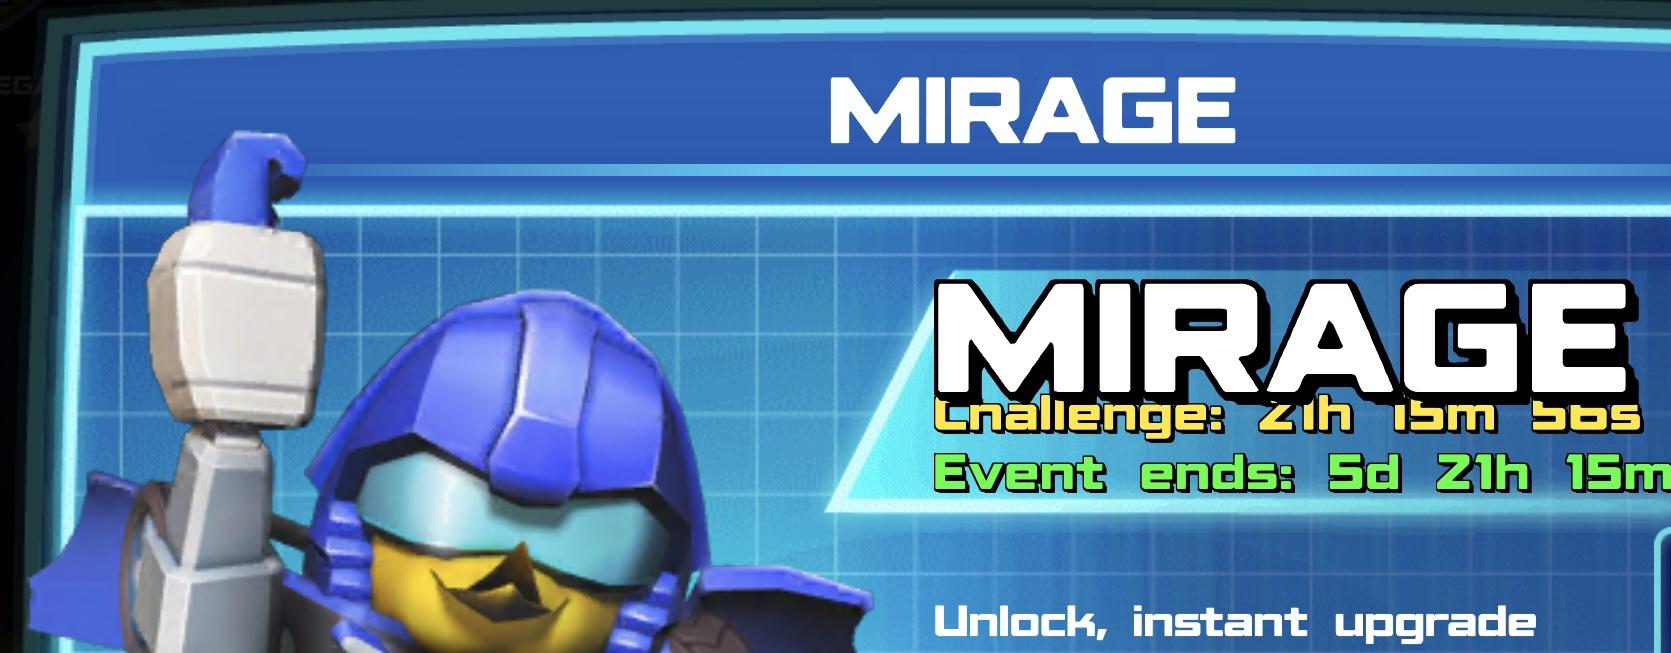 The event banner for Mirage